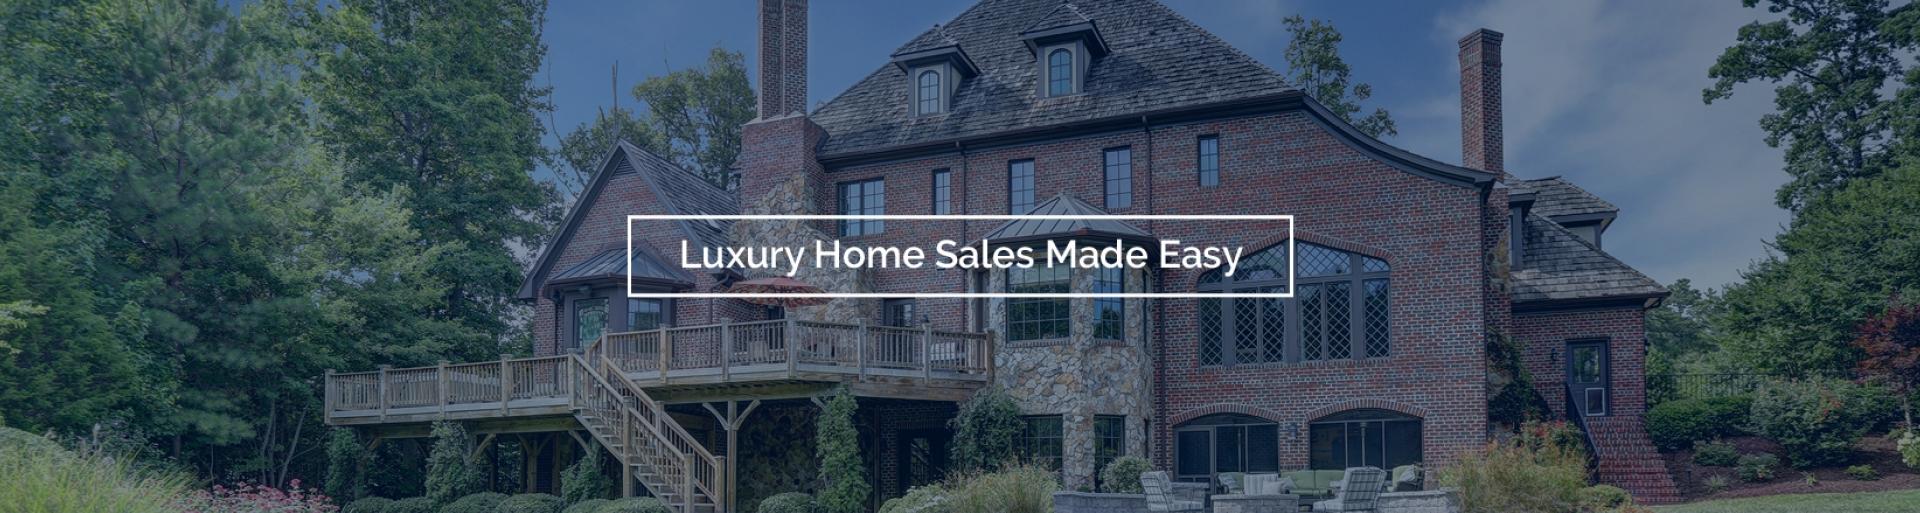 Luxury Home Sales Made Easy